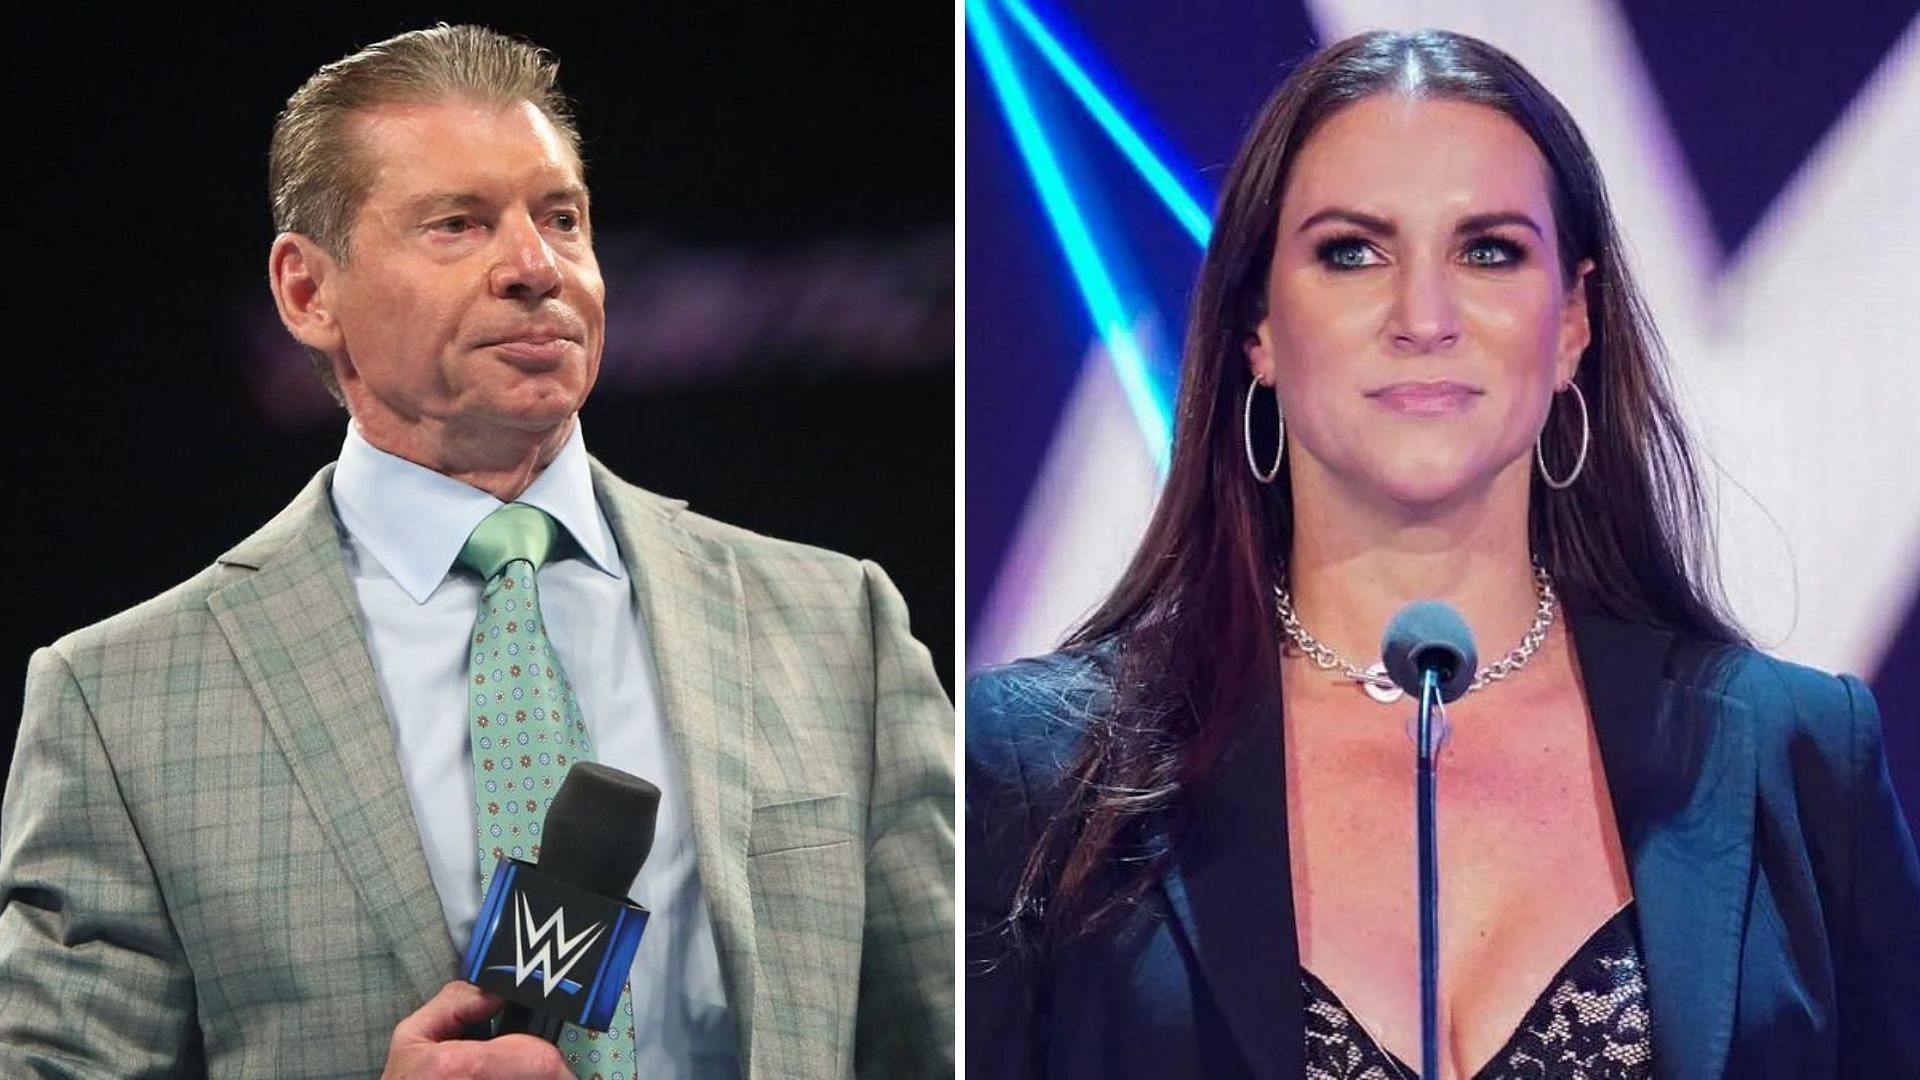 The Chairman of the Board, Vince McMahon, and Stephanie McMahon